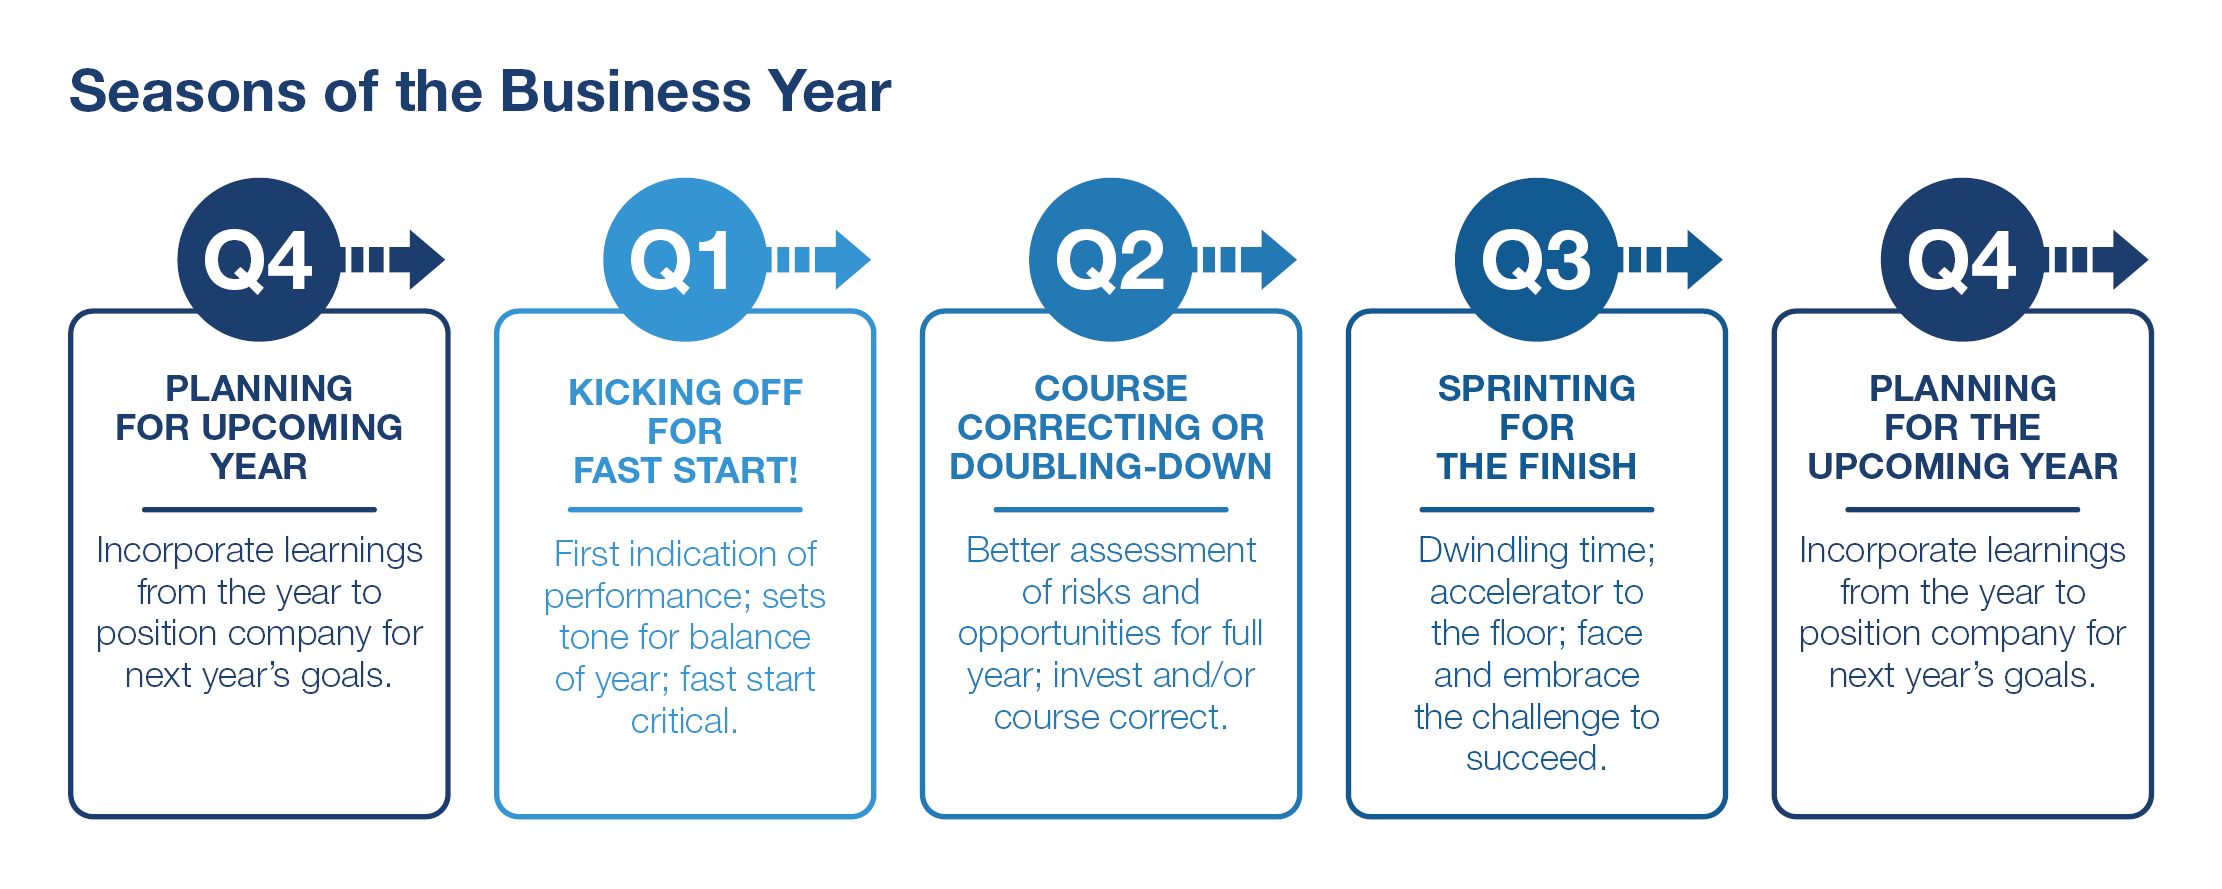 Seasons of the Business Year